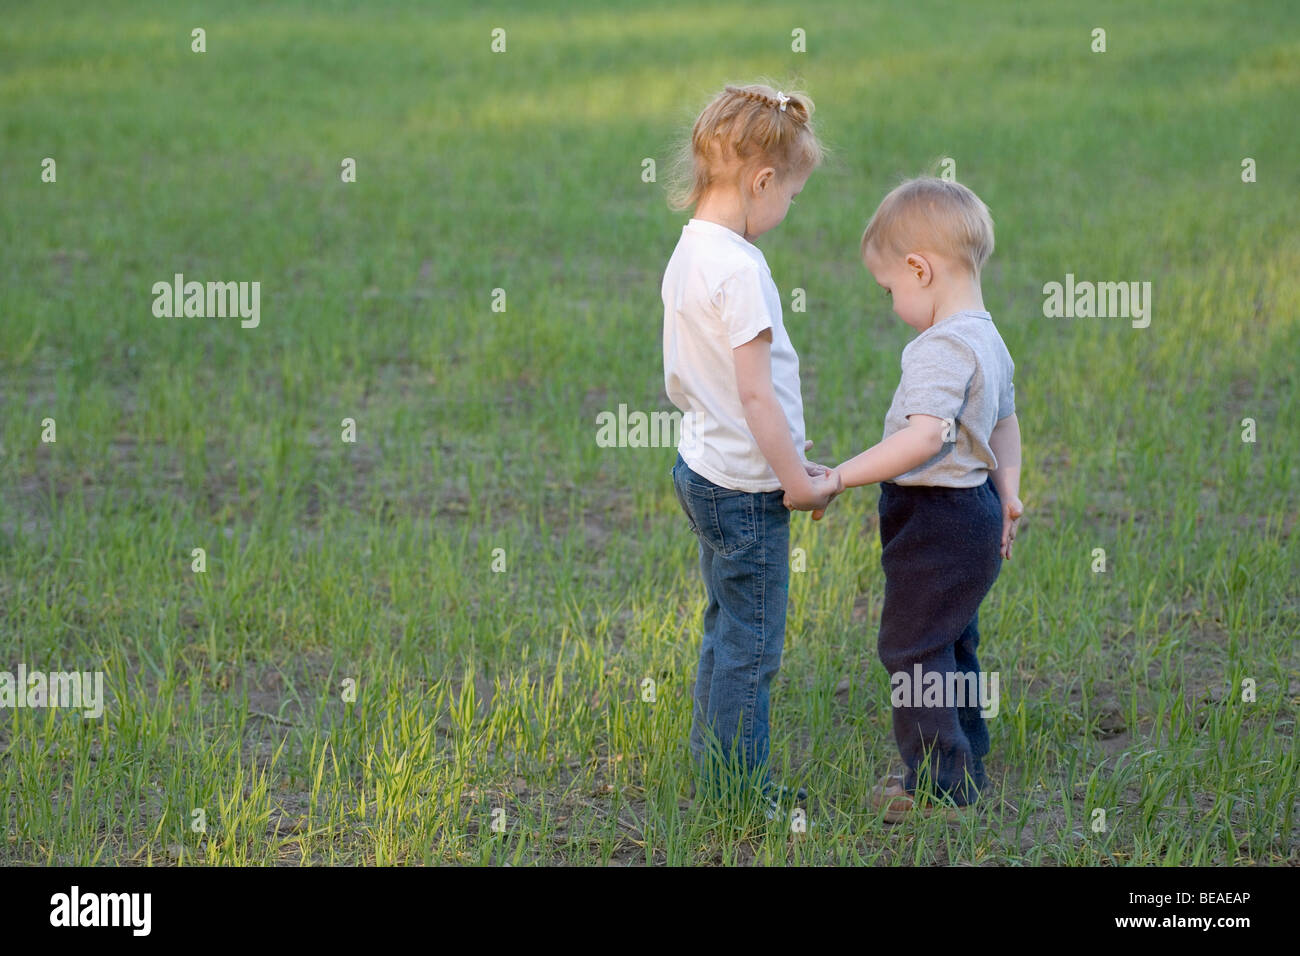 A young sister and brother holding hands, outdoors Stock Photo